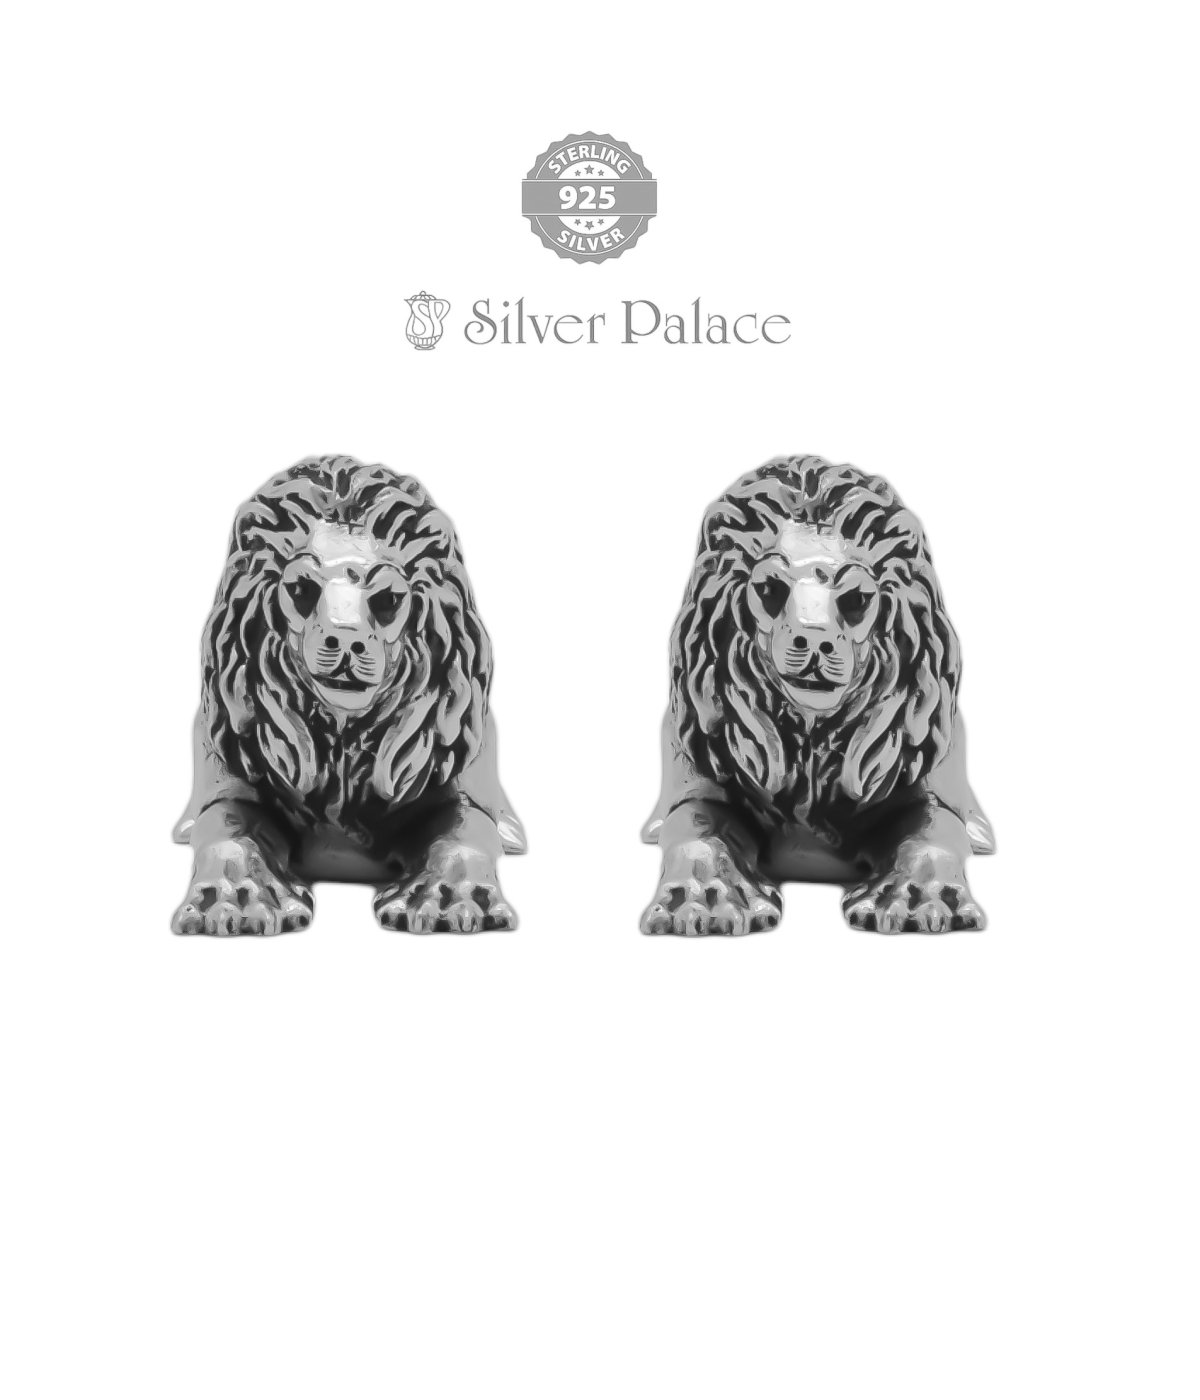 925 SILVER HANS COLLECTIONS  HAND CRAFTED LION SHOWPIECE FOR HOME DECOR 